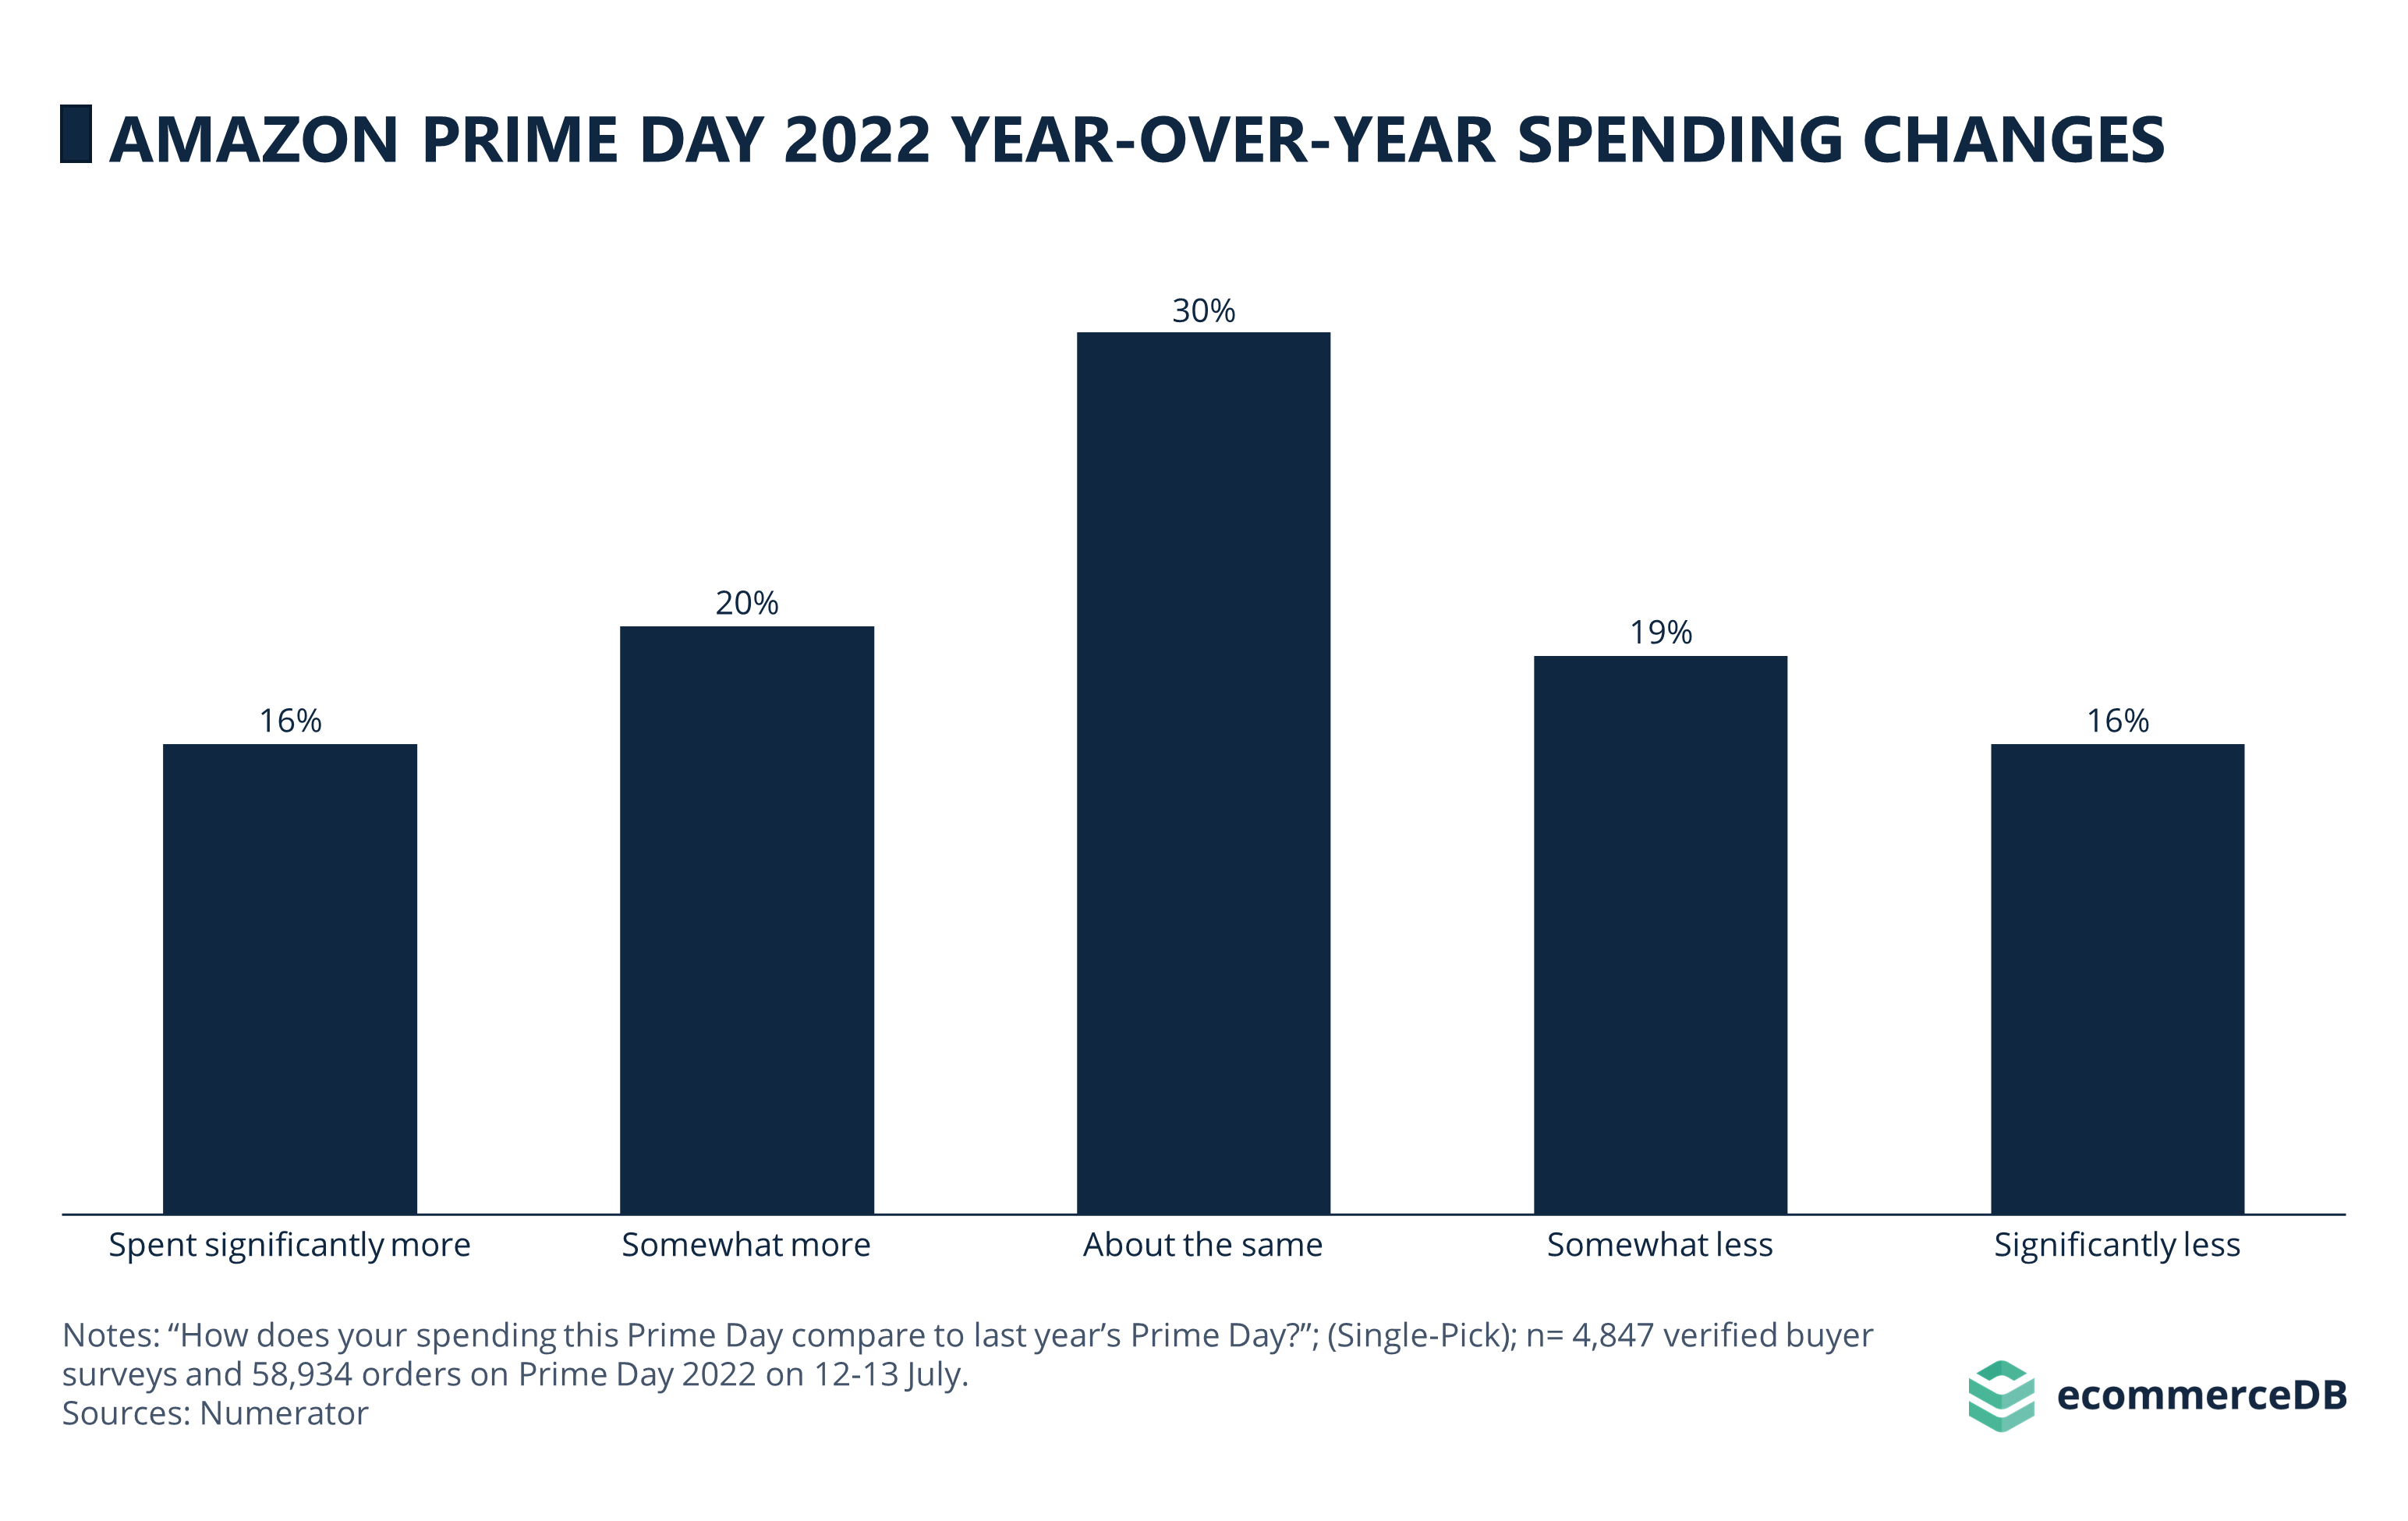 Prime Day 2022 YoY Spending Changes